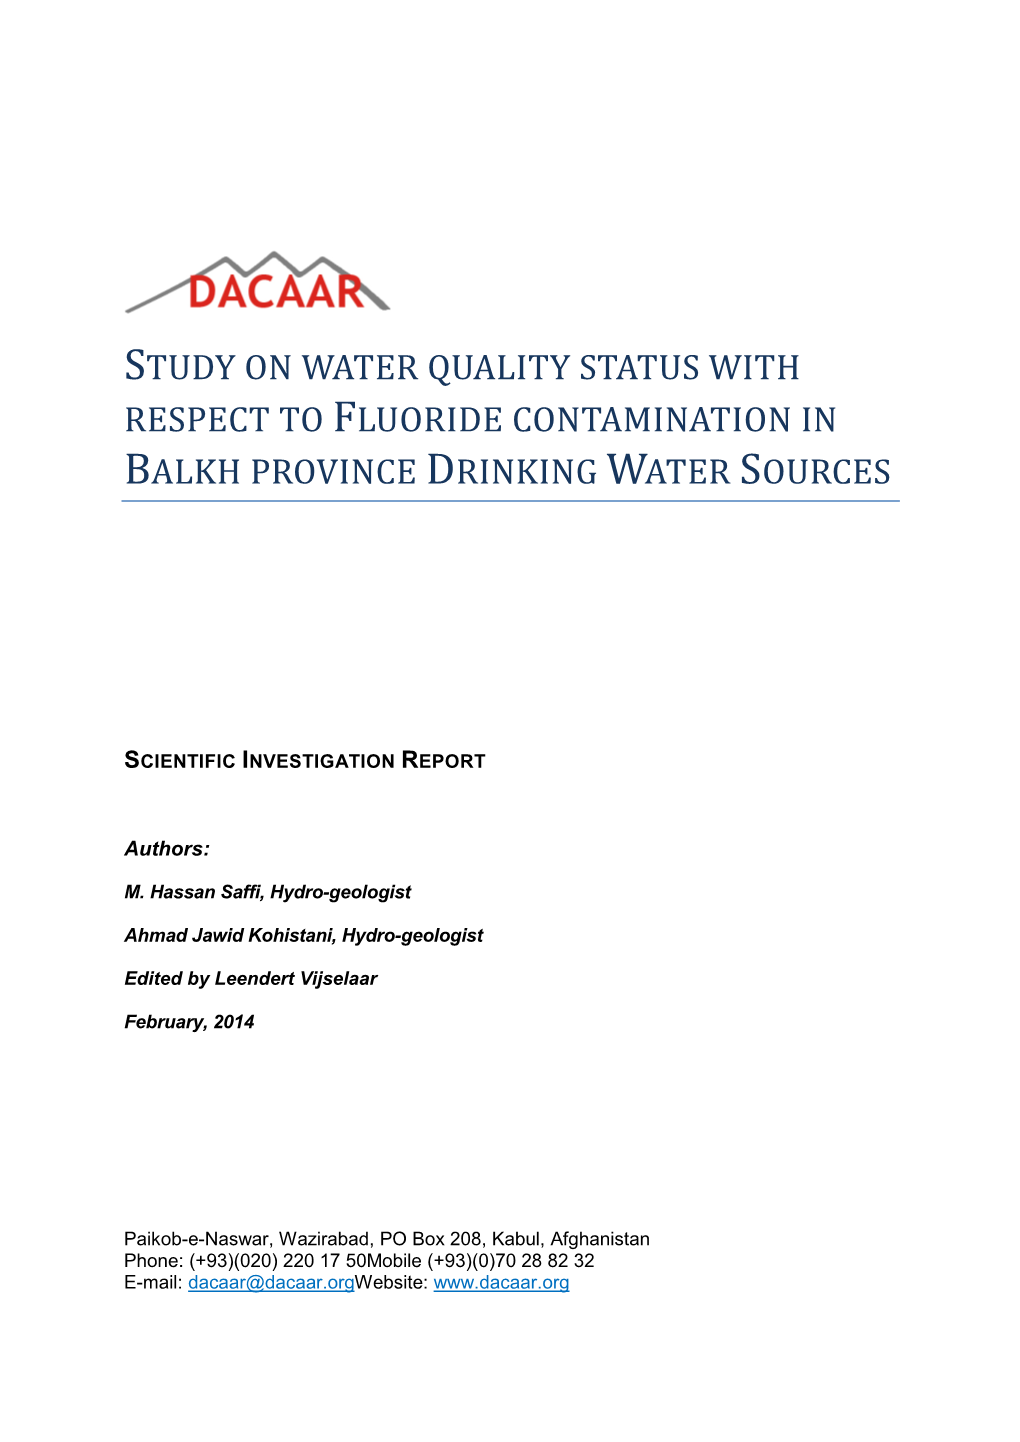 Study on Water Quality Status with Respect to Fluoride Contamination in Balkh Province Drinking Water Sources